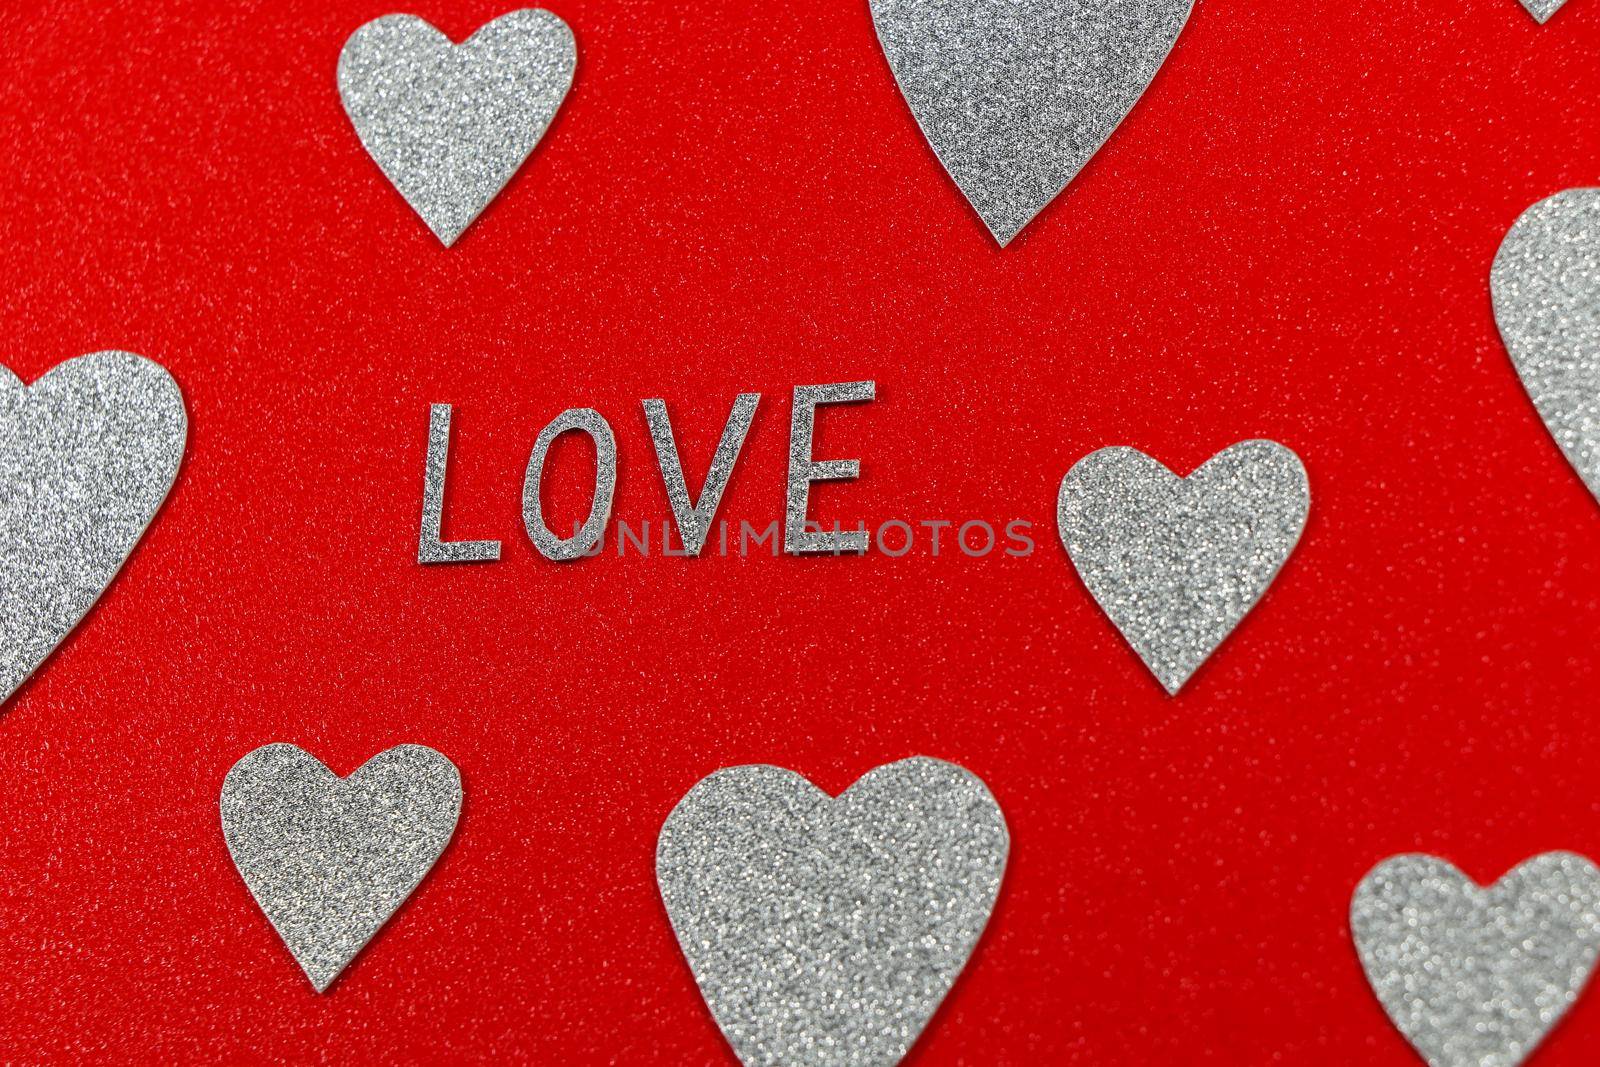 Saint Valentine's day love text and silver hearts design on red background abstract